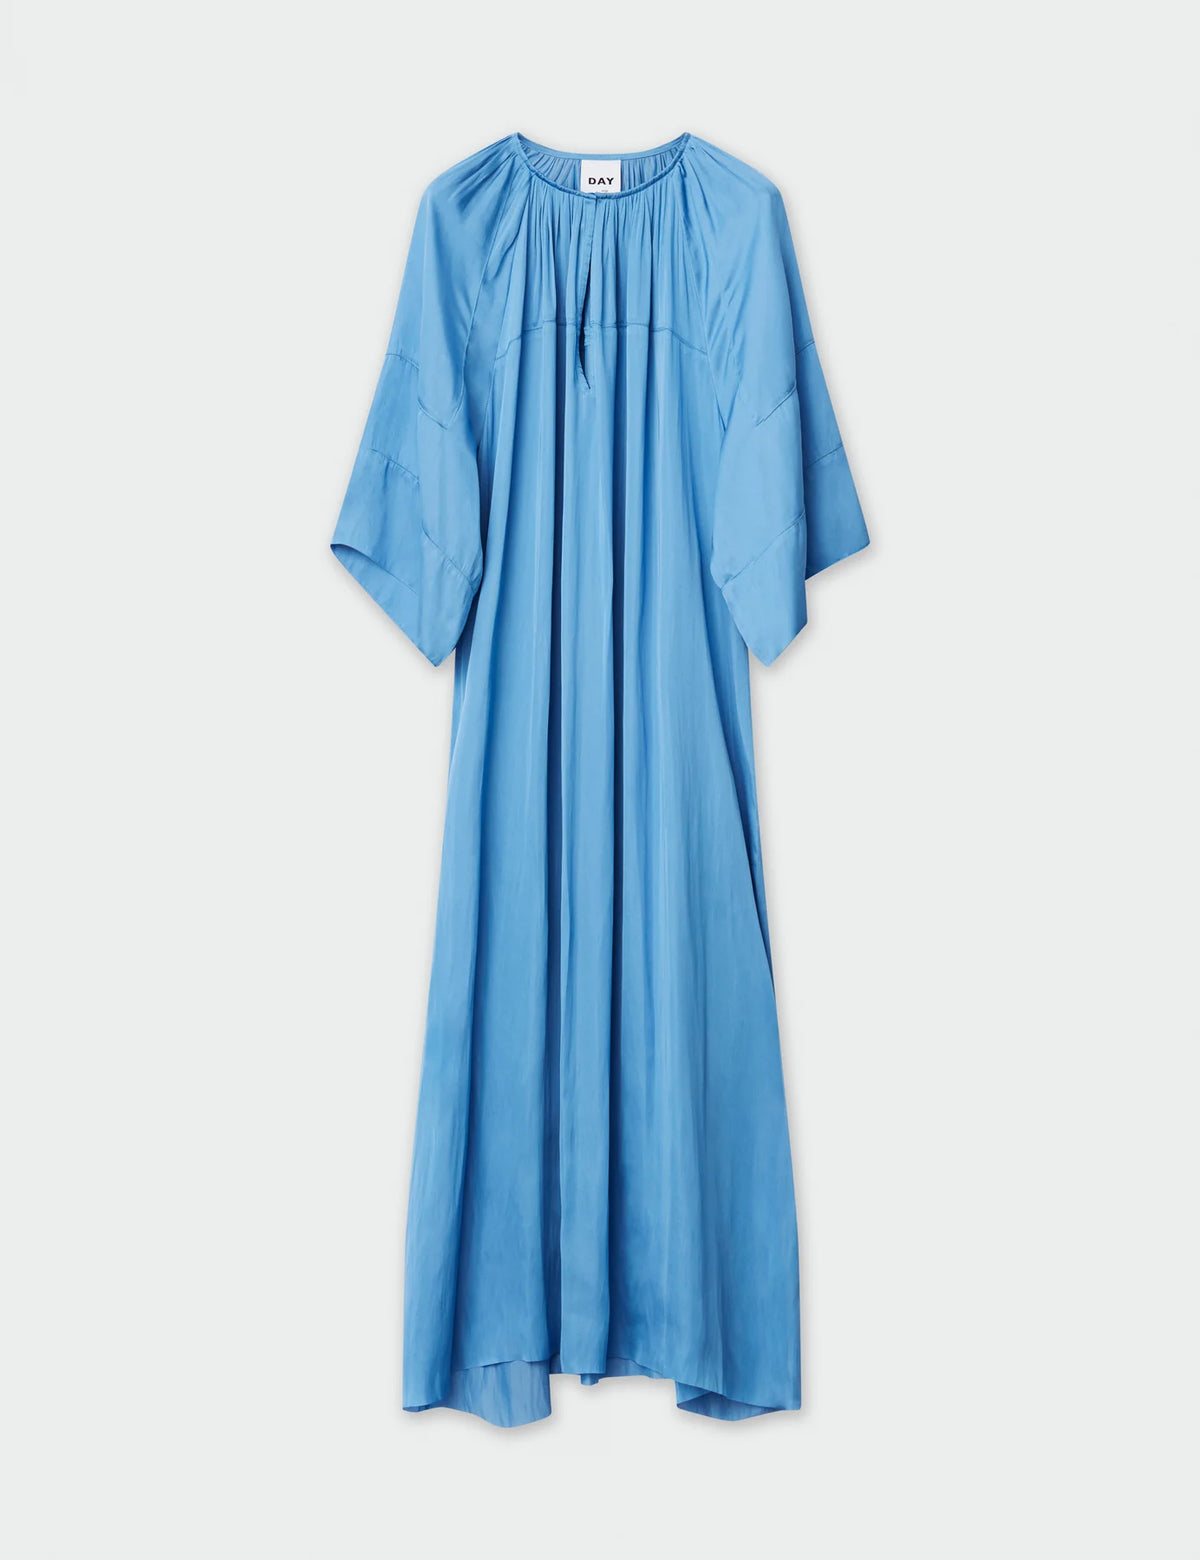 Light blue fluid long dress with crew neckline and short wide sleeves